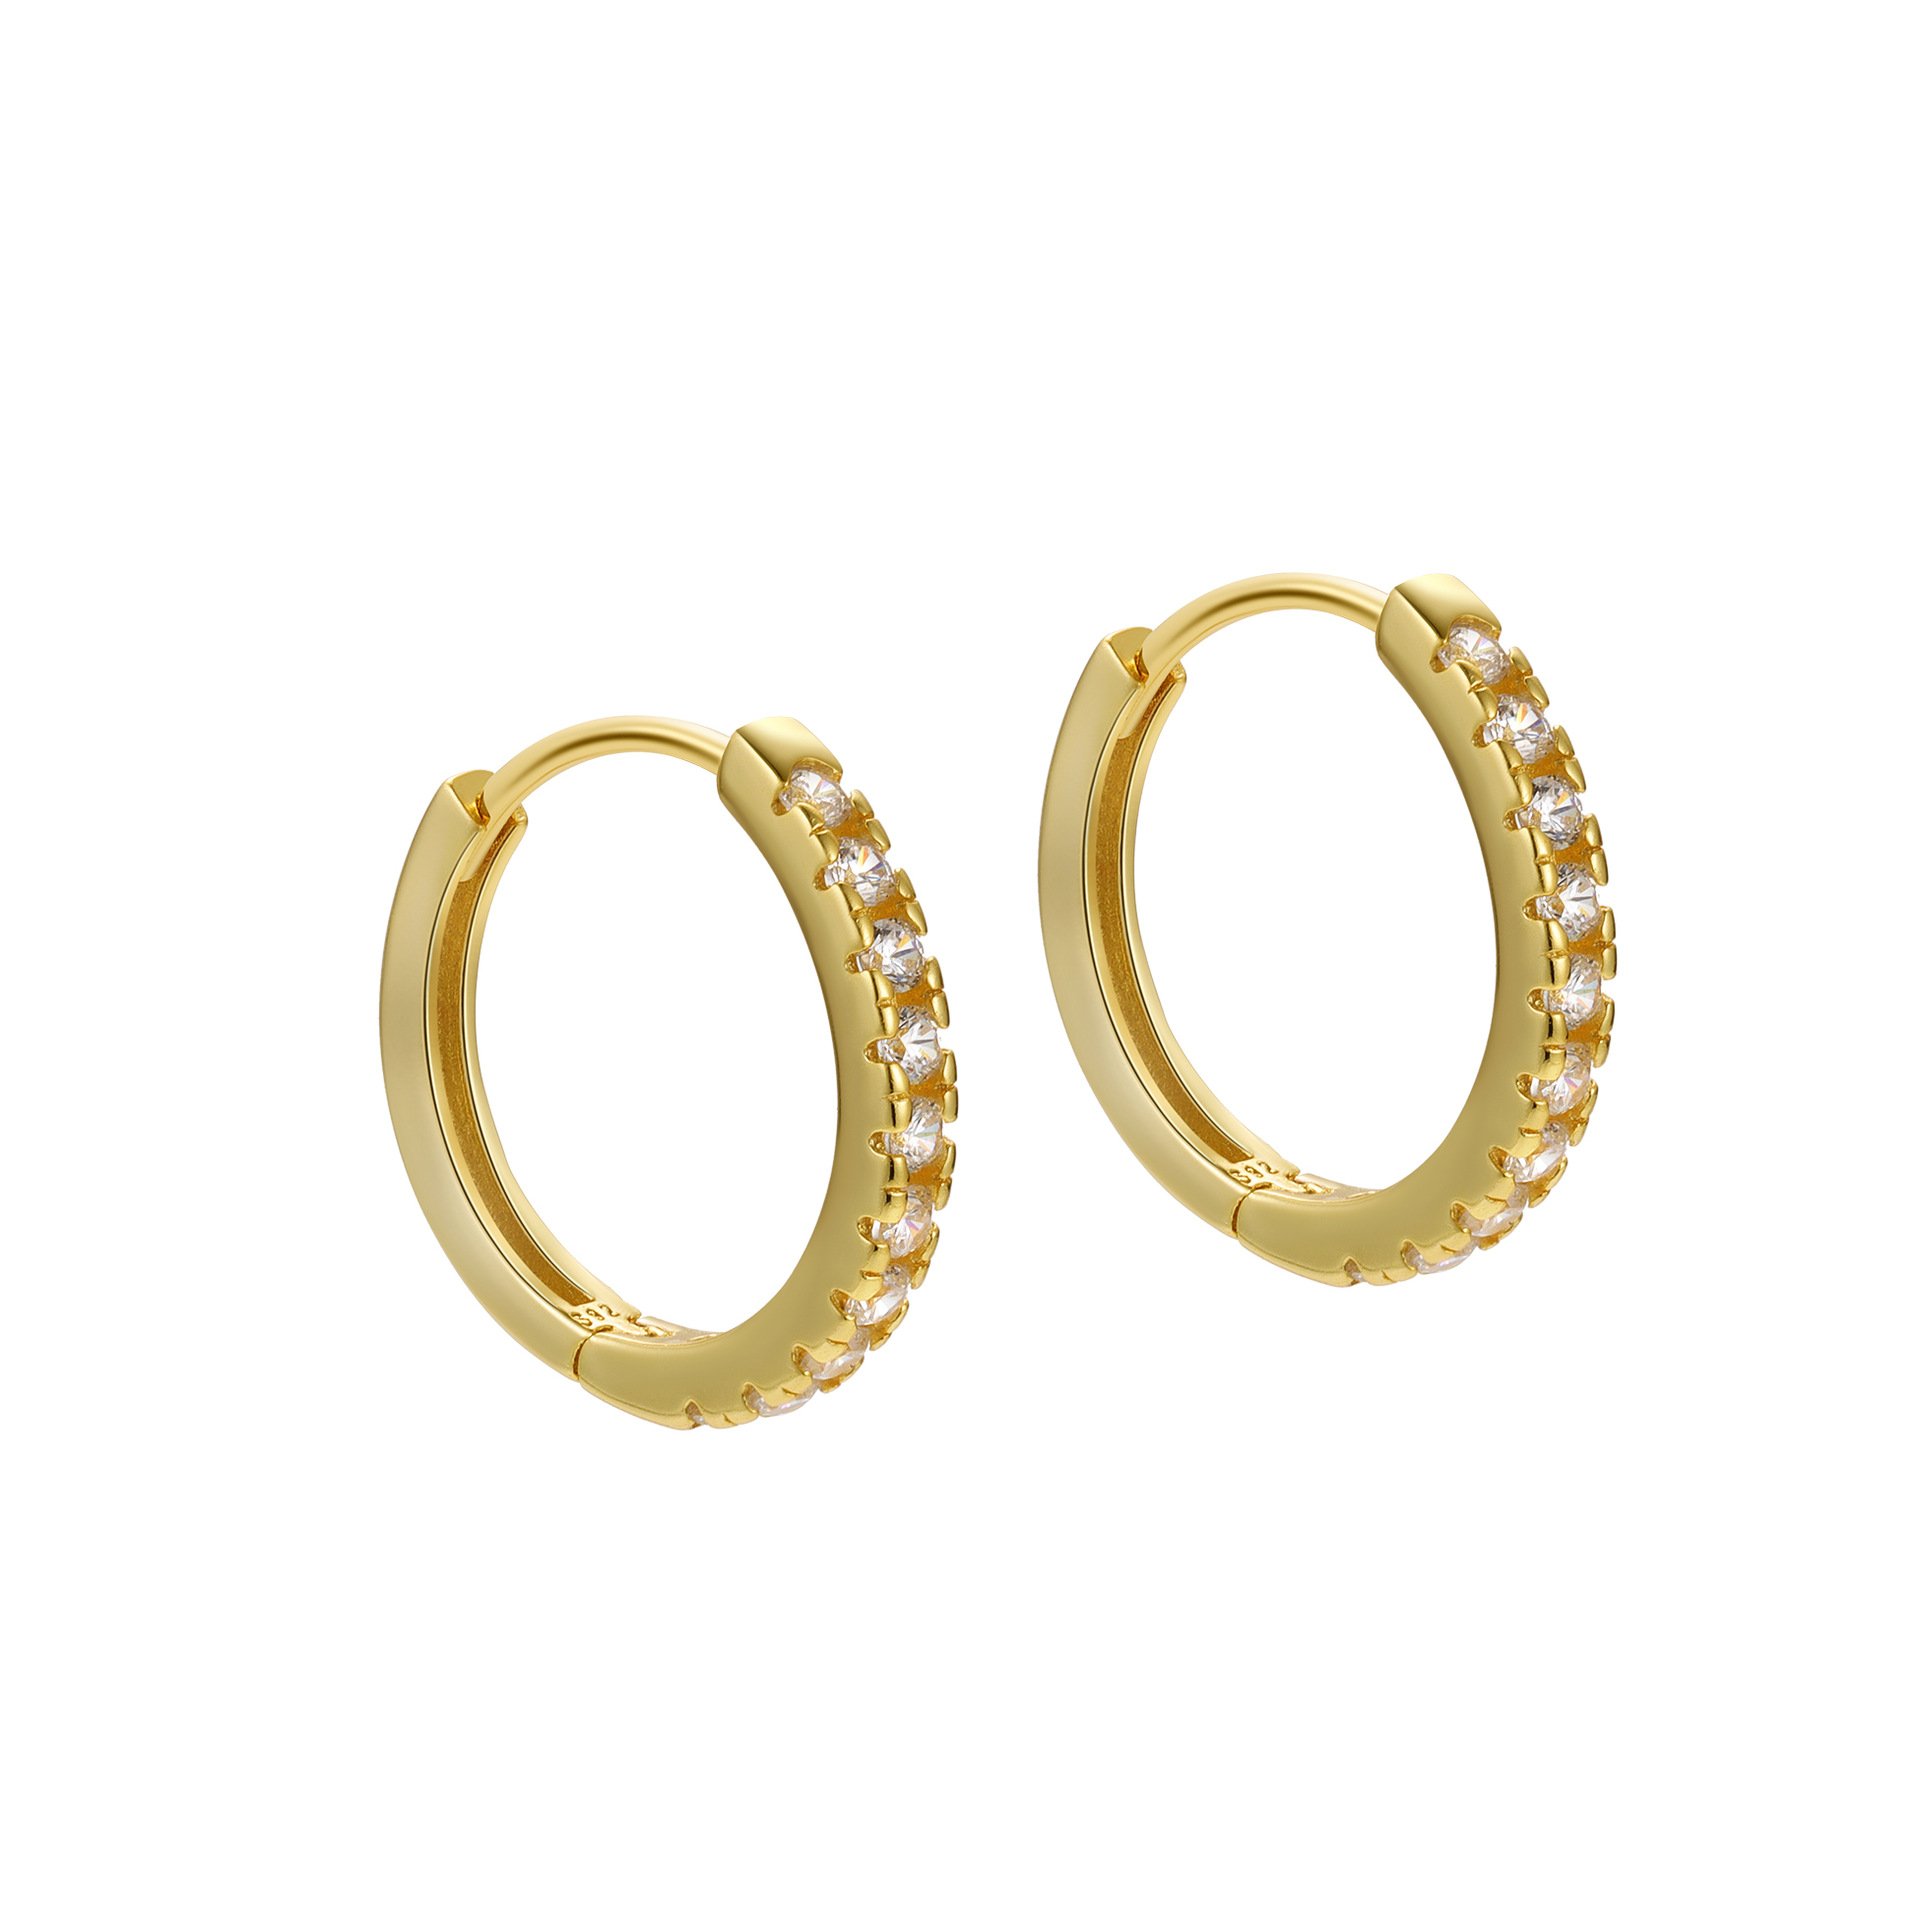 3:gold 12.5*16.5mm